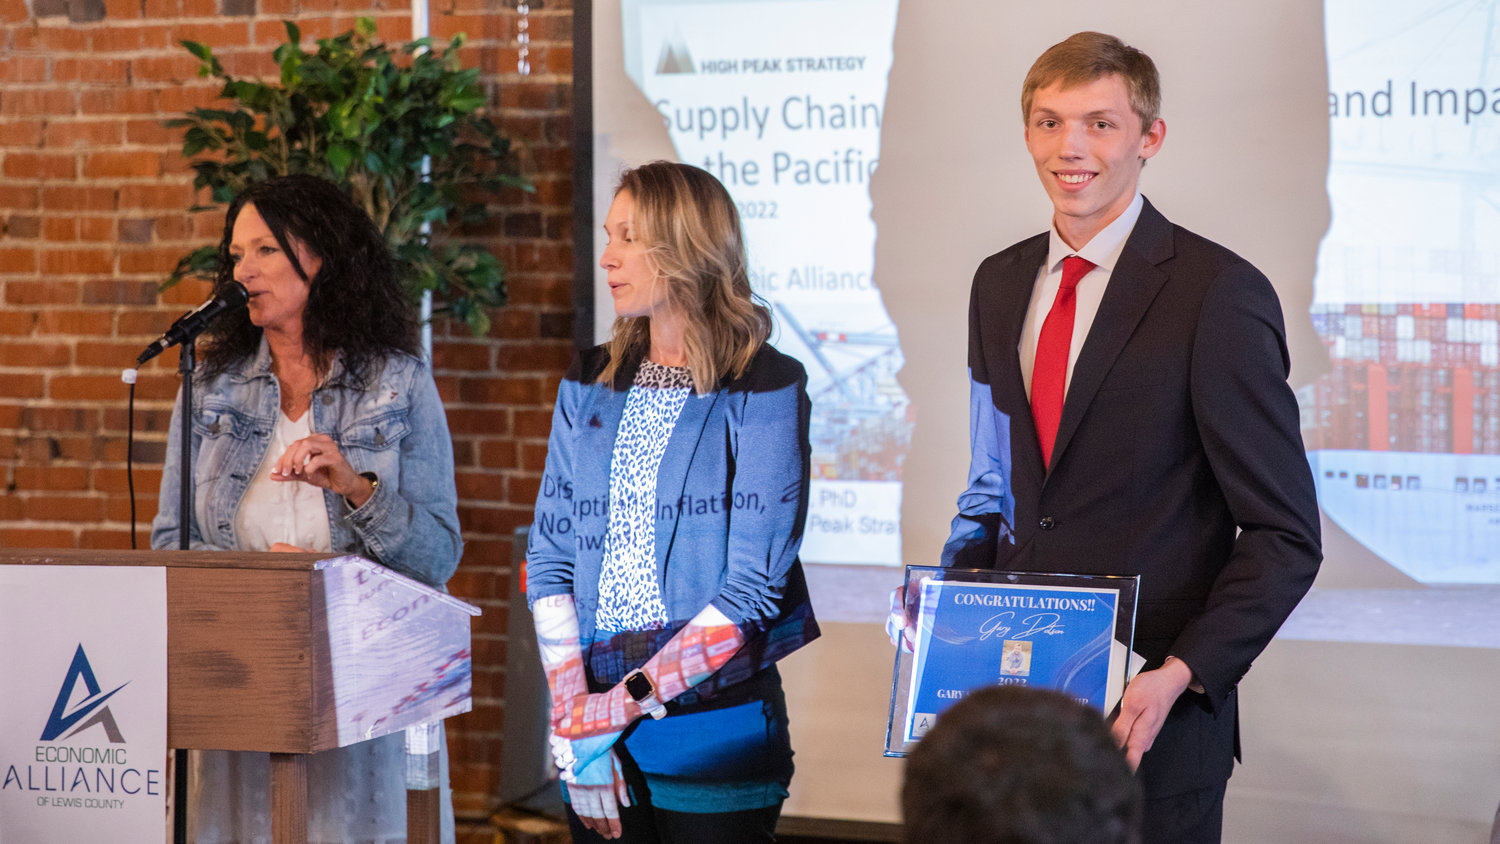 Gary Dotson, the Gary Stamper Scholarship recipient, smiles for a photo while standing to be recognized at The Loft during an Economic Alliance Summit event in Chehalis on Thursday.